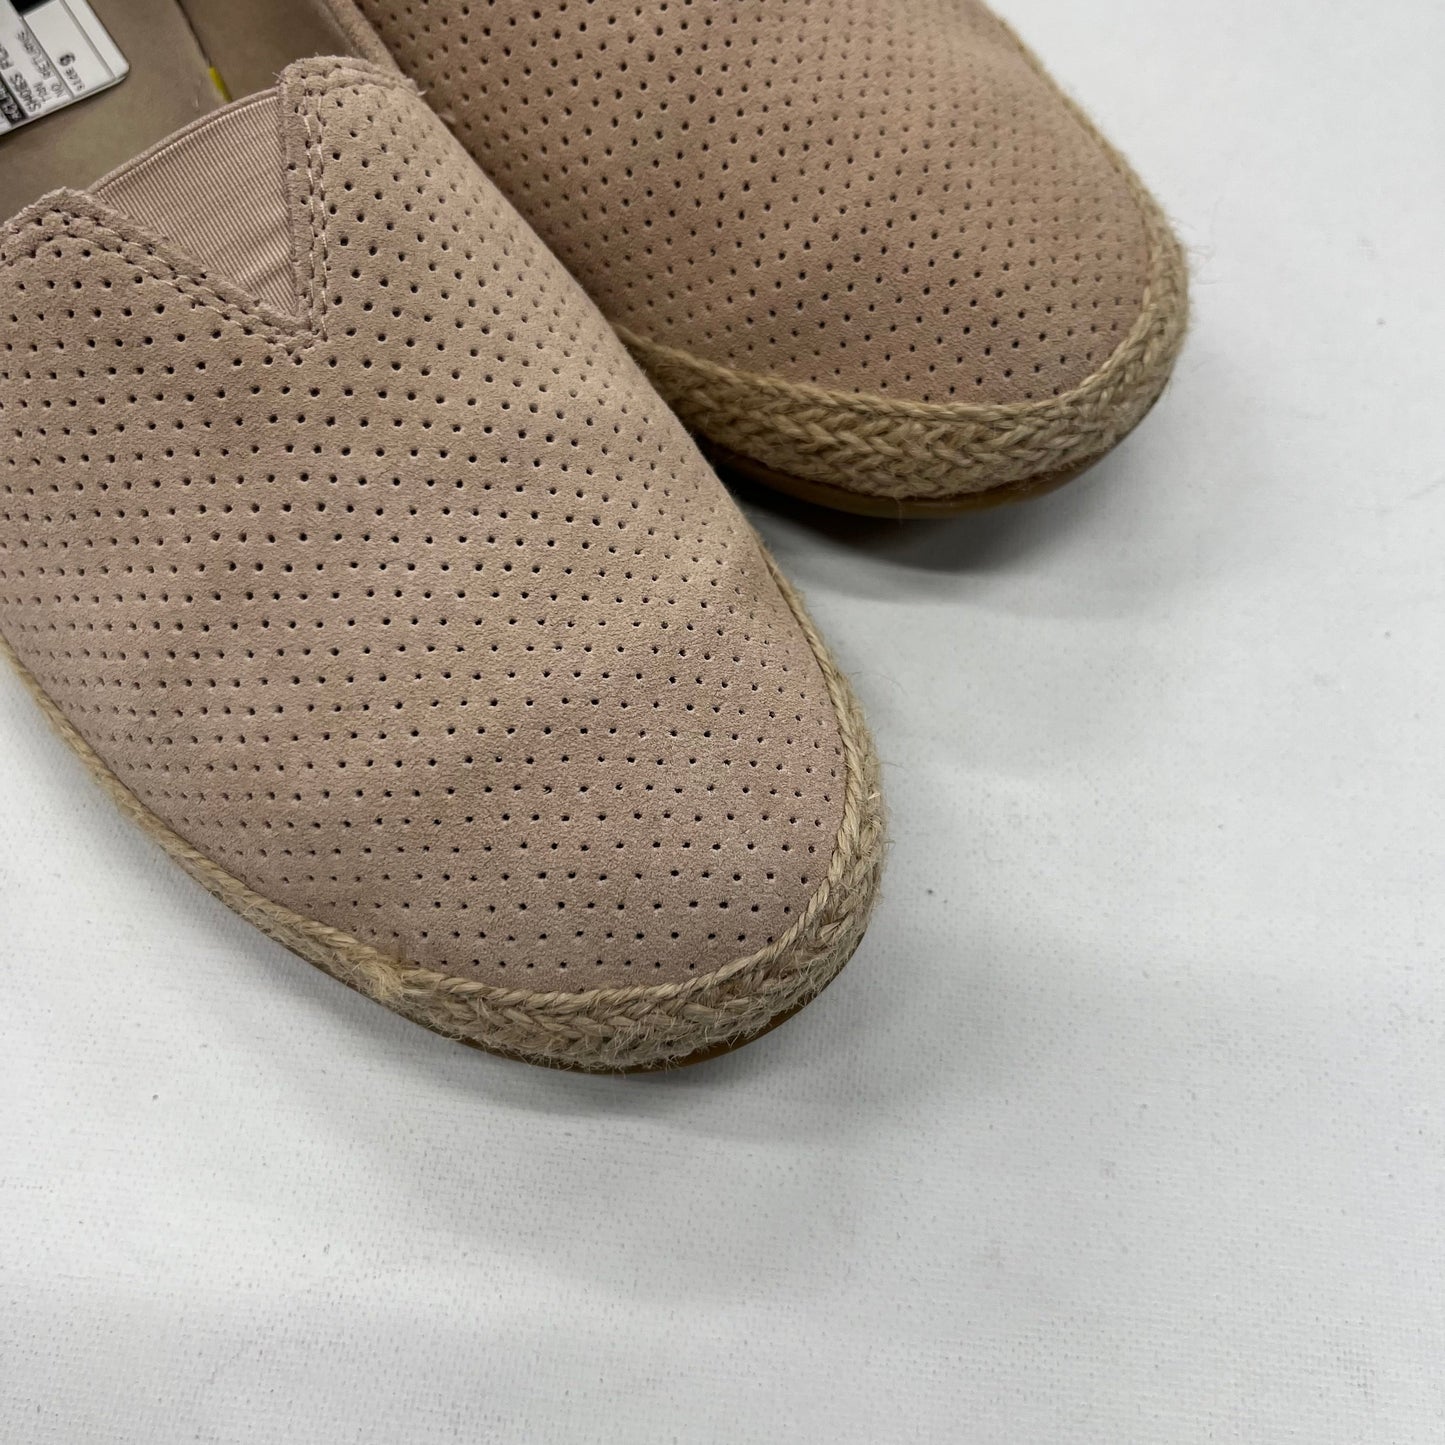 Shoes Flats Moccasin By Clarks  Size: 9